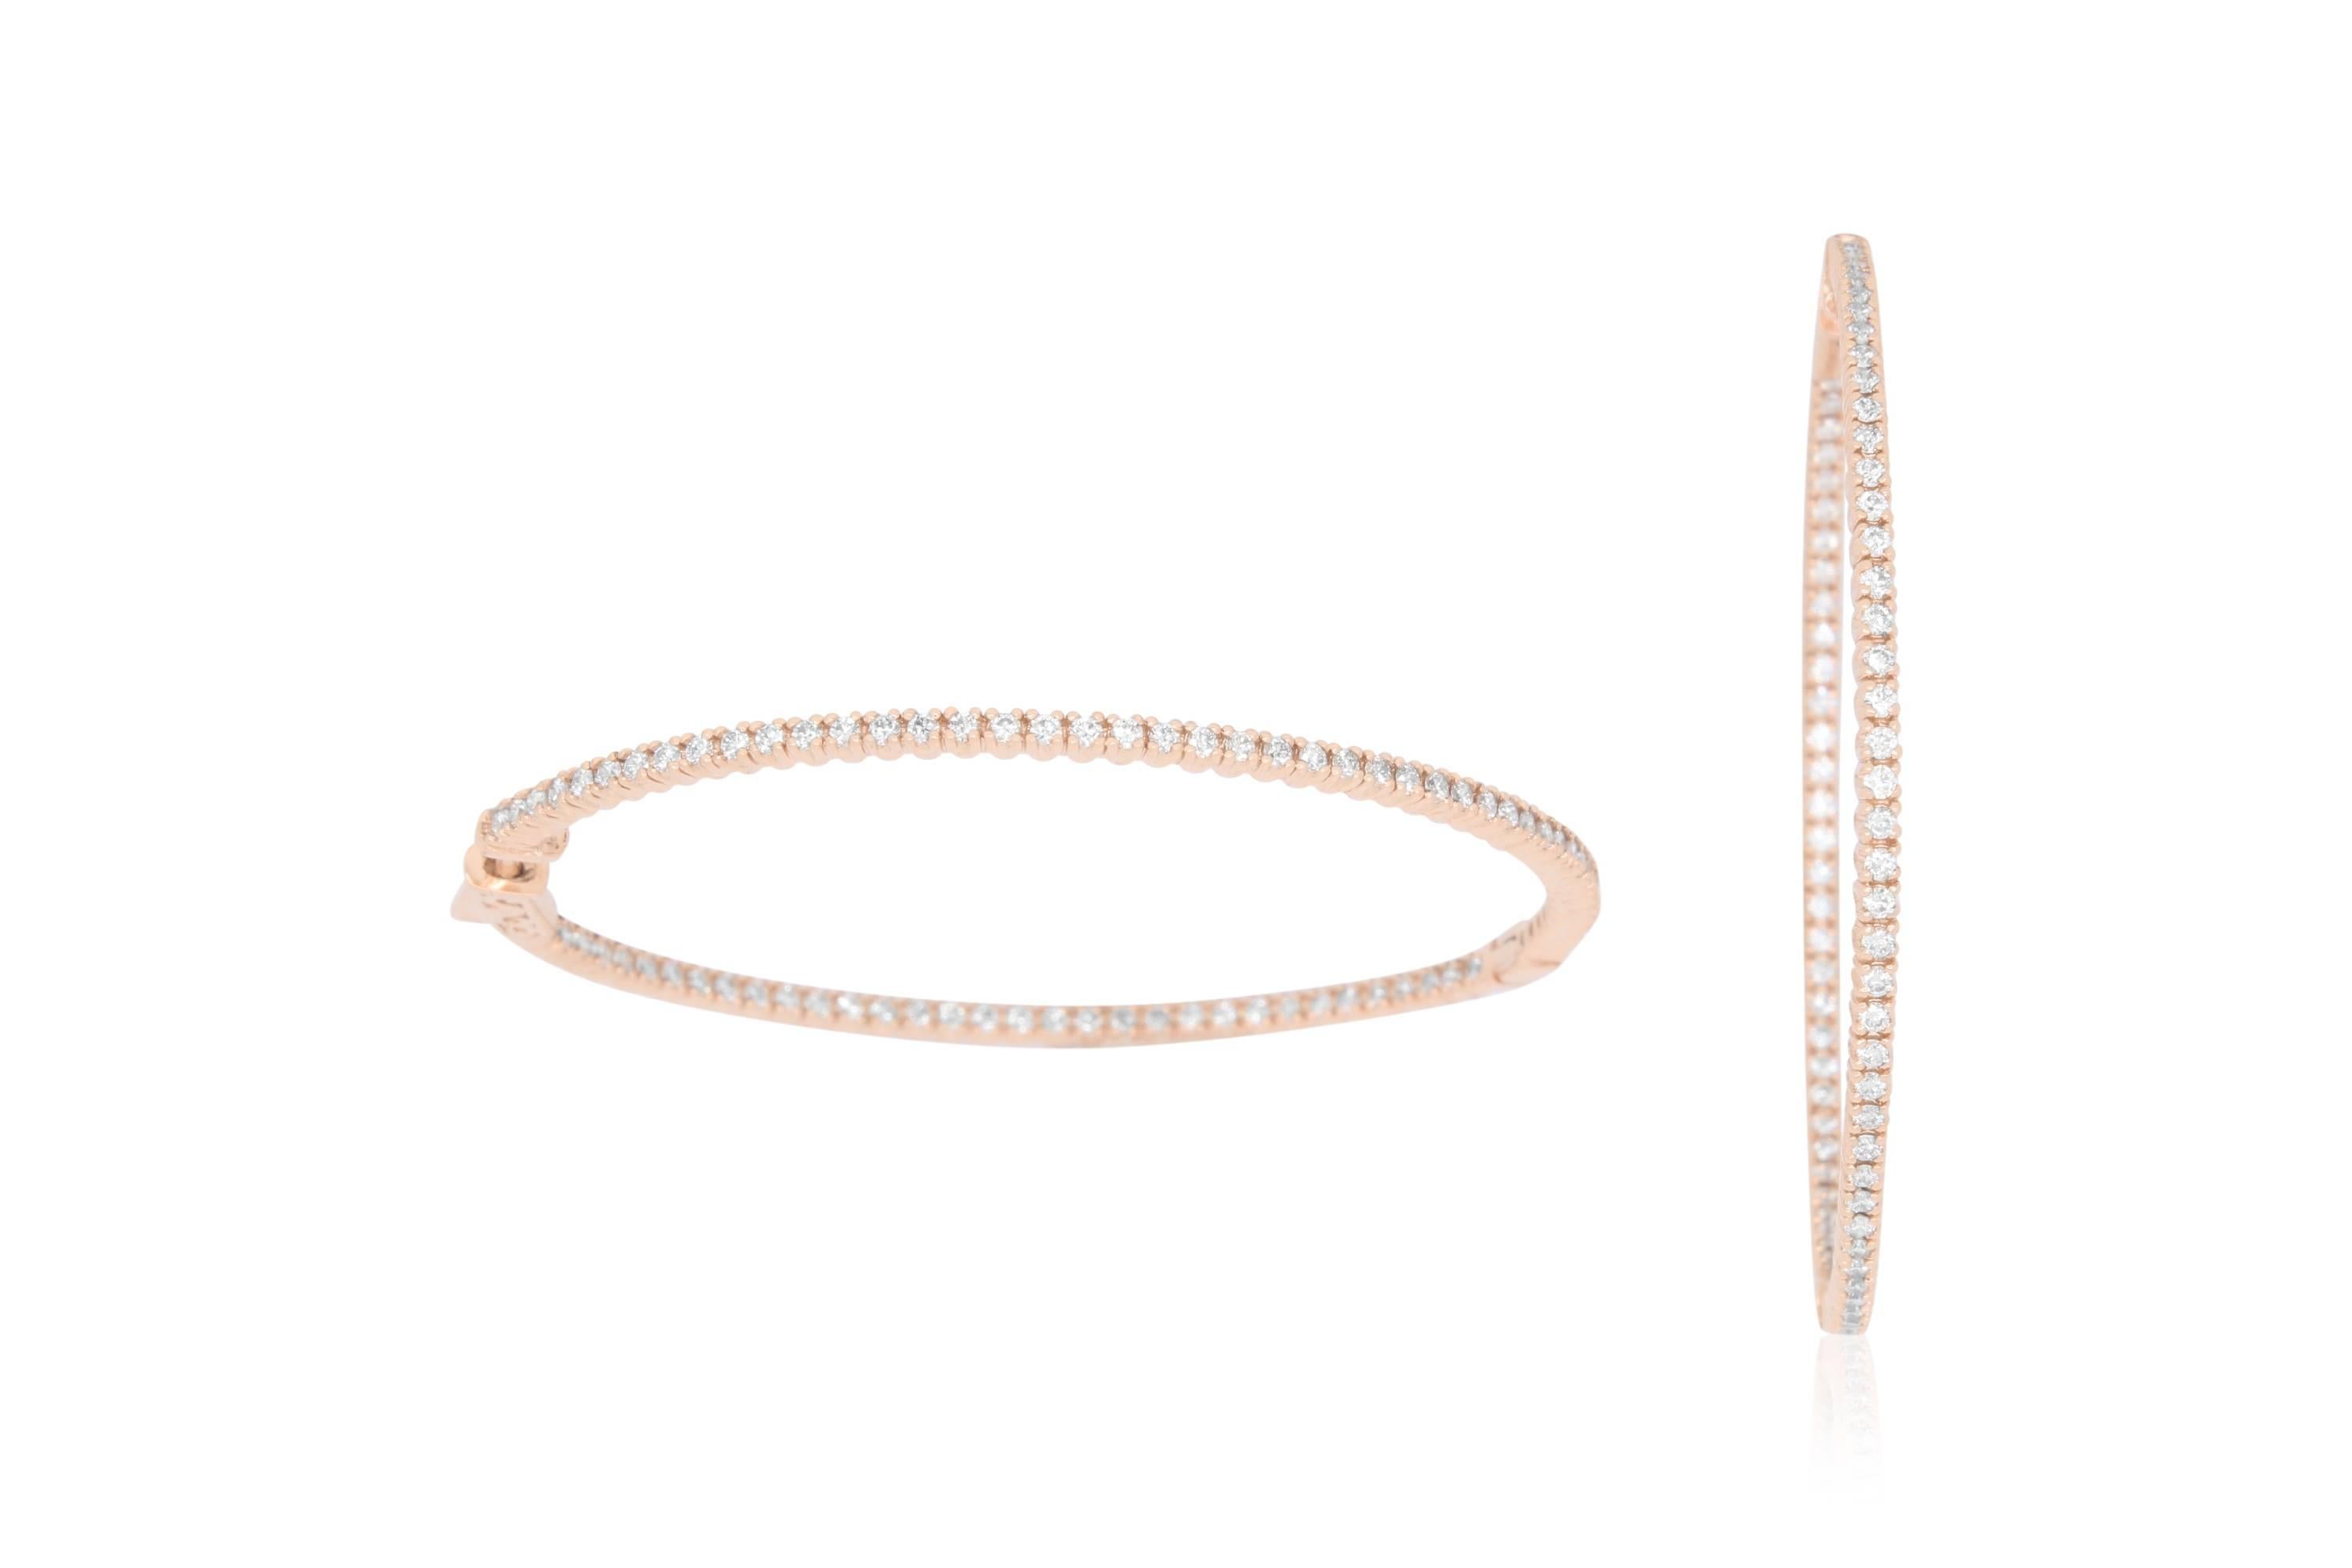 Beautiful & classic, these hoops will add sparkle and shine to any look.

Material: 14k Rose Gold 
Mounting Stone Details: 160 Round Diamonds at 1.60 Carat Total- Clarity: SI / Color: H-I
Approximately 2 inch diameter

Fine one-of-a-kind